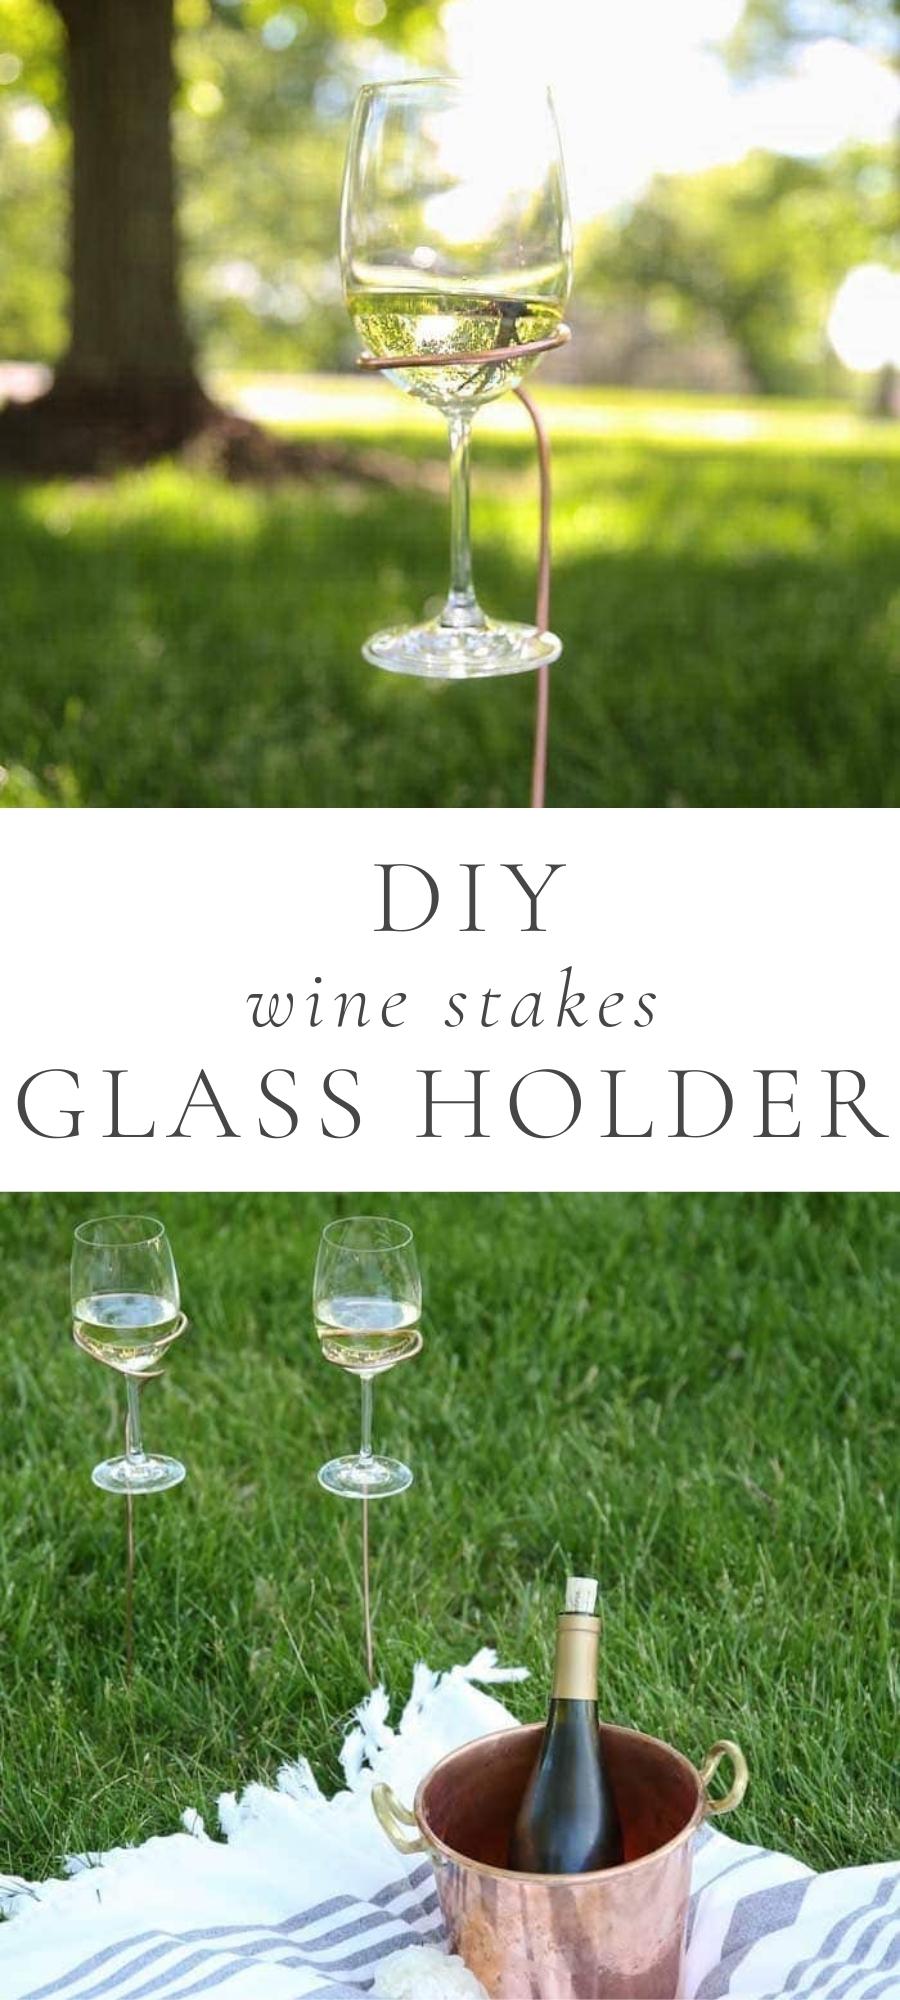 glass of wine in glass holder I grass and wine bucket on blanket